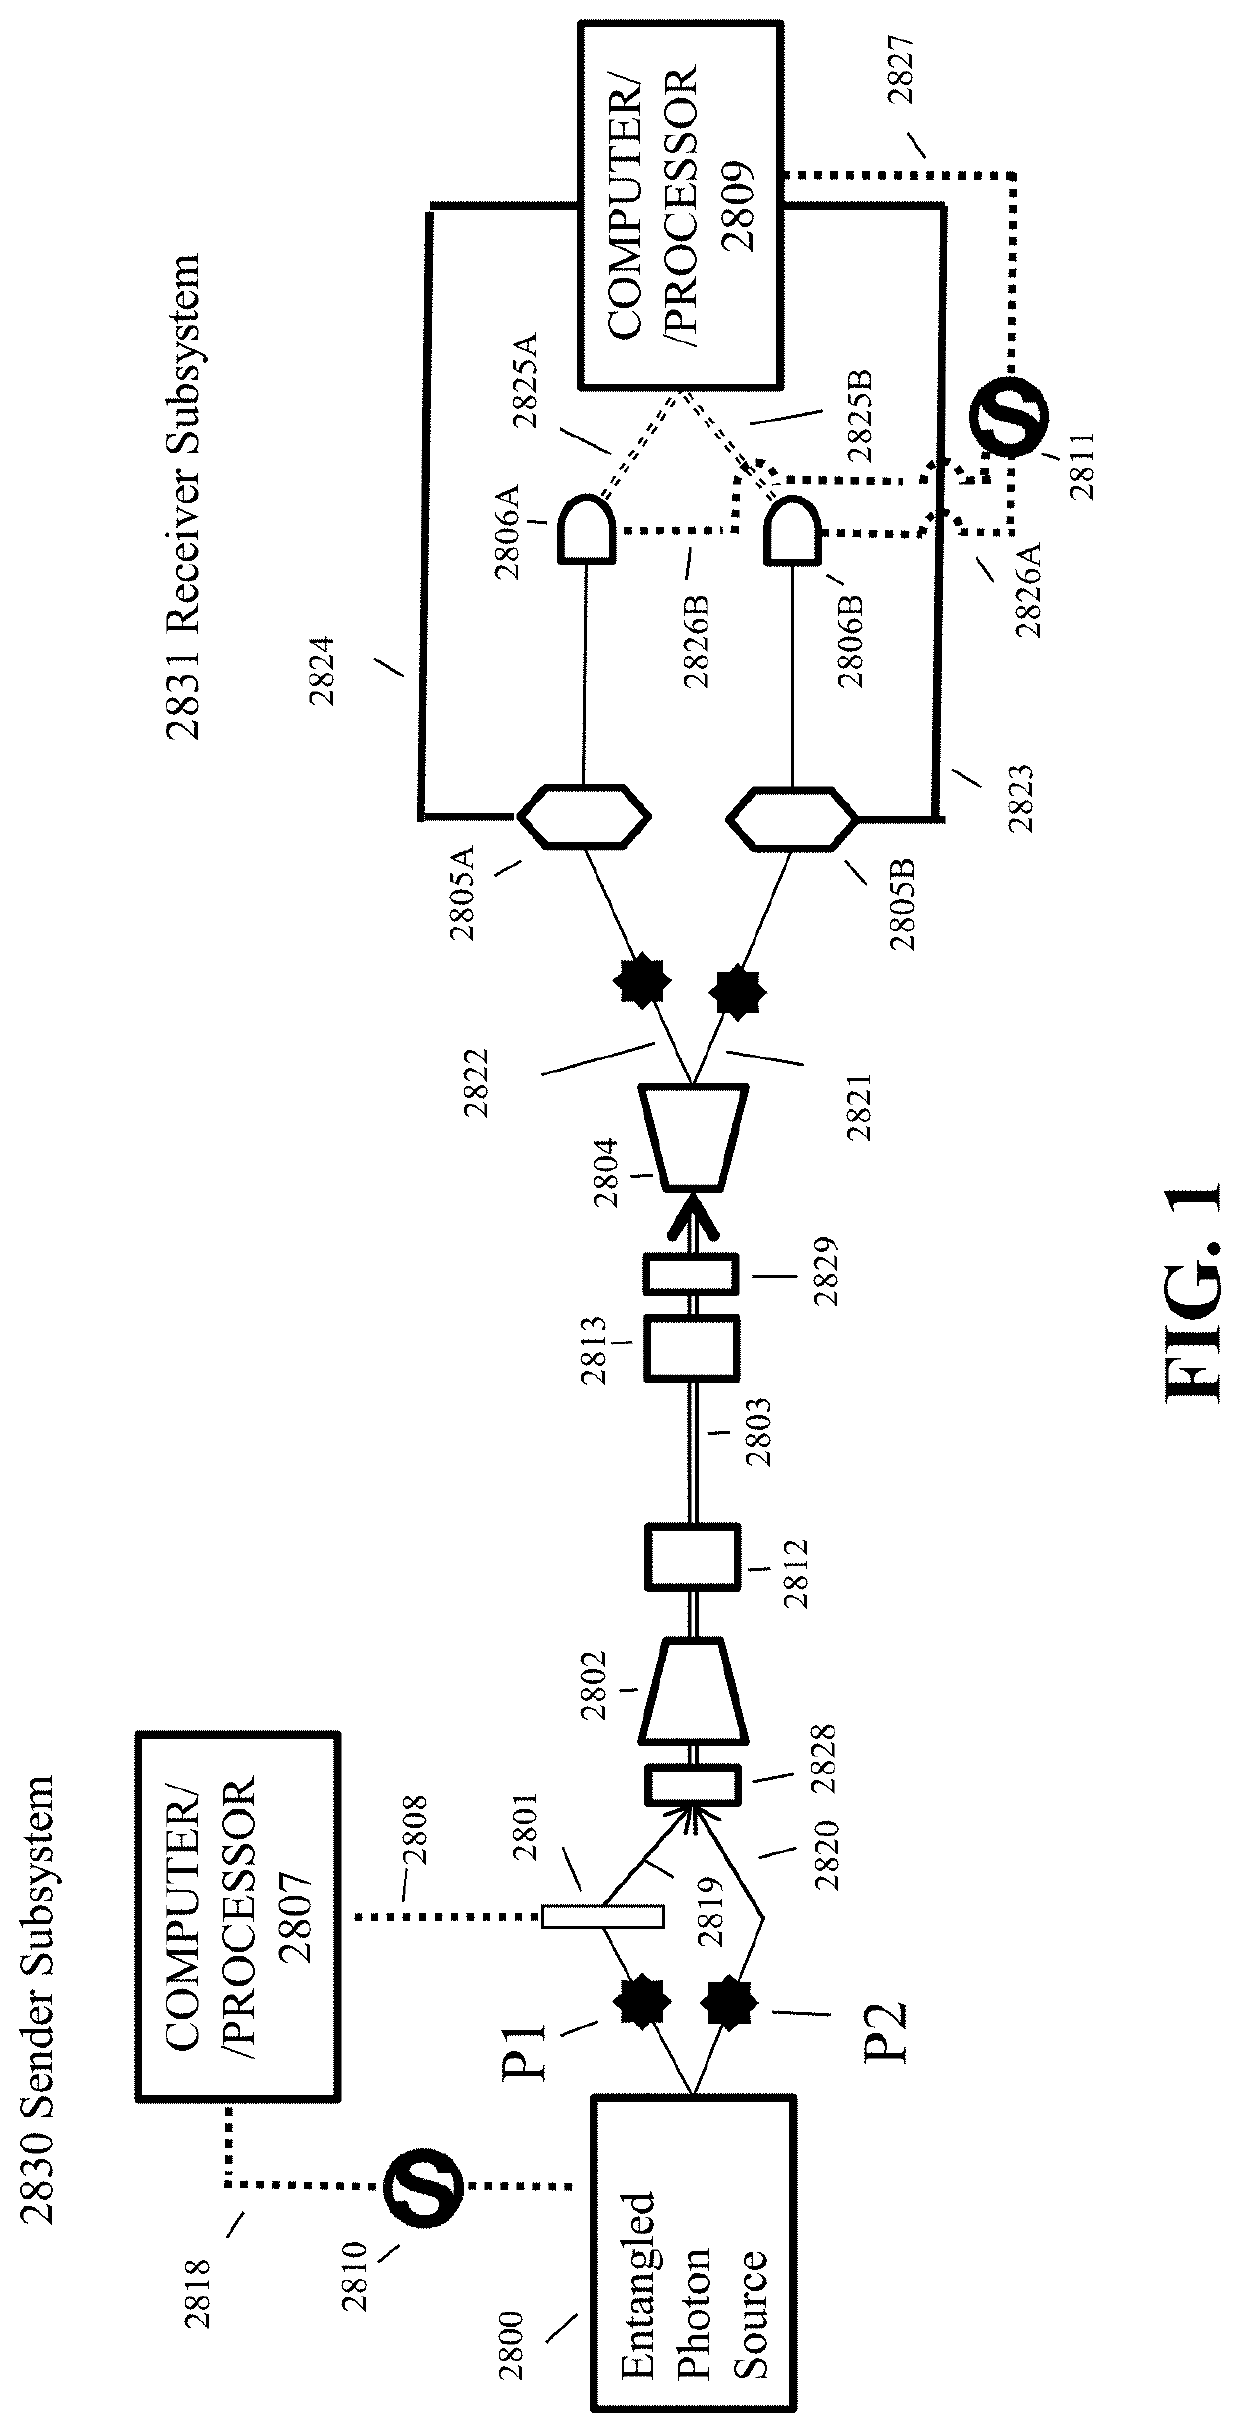 System and method for communication of information using entangled photons